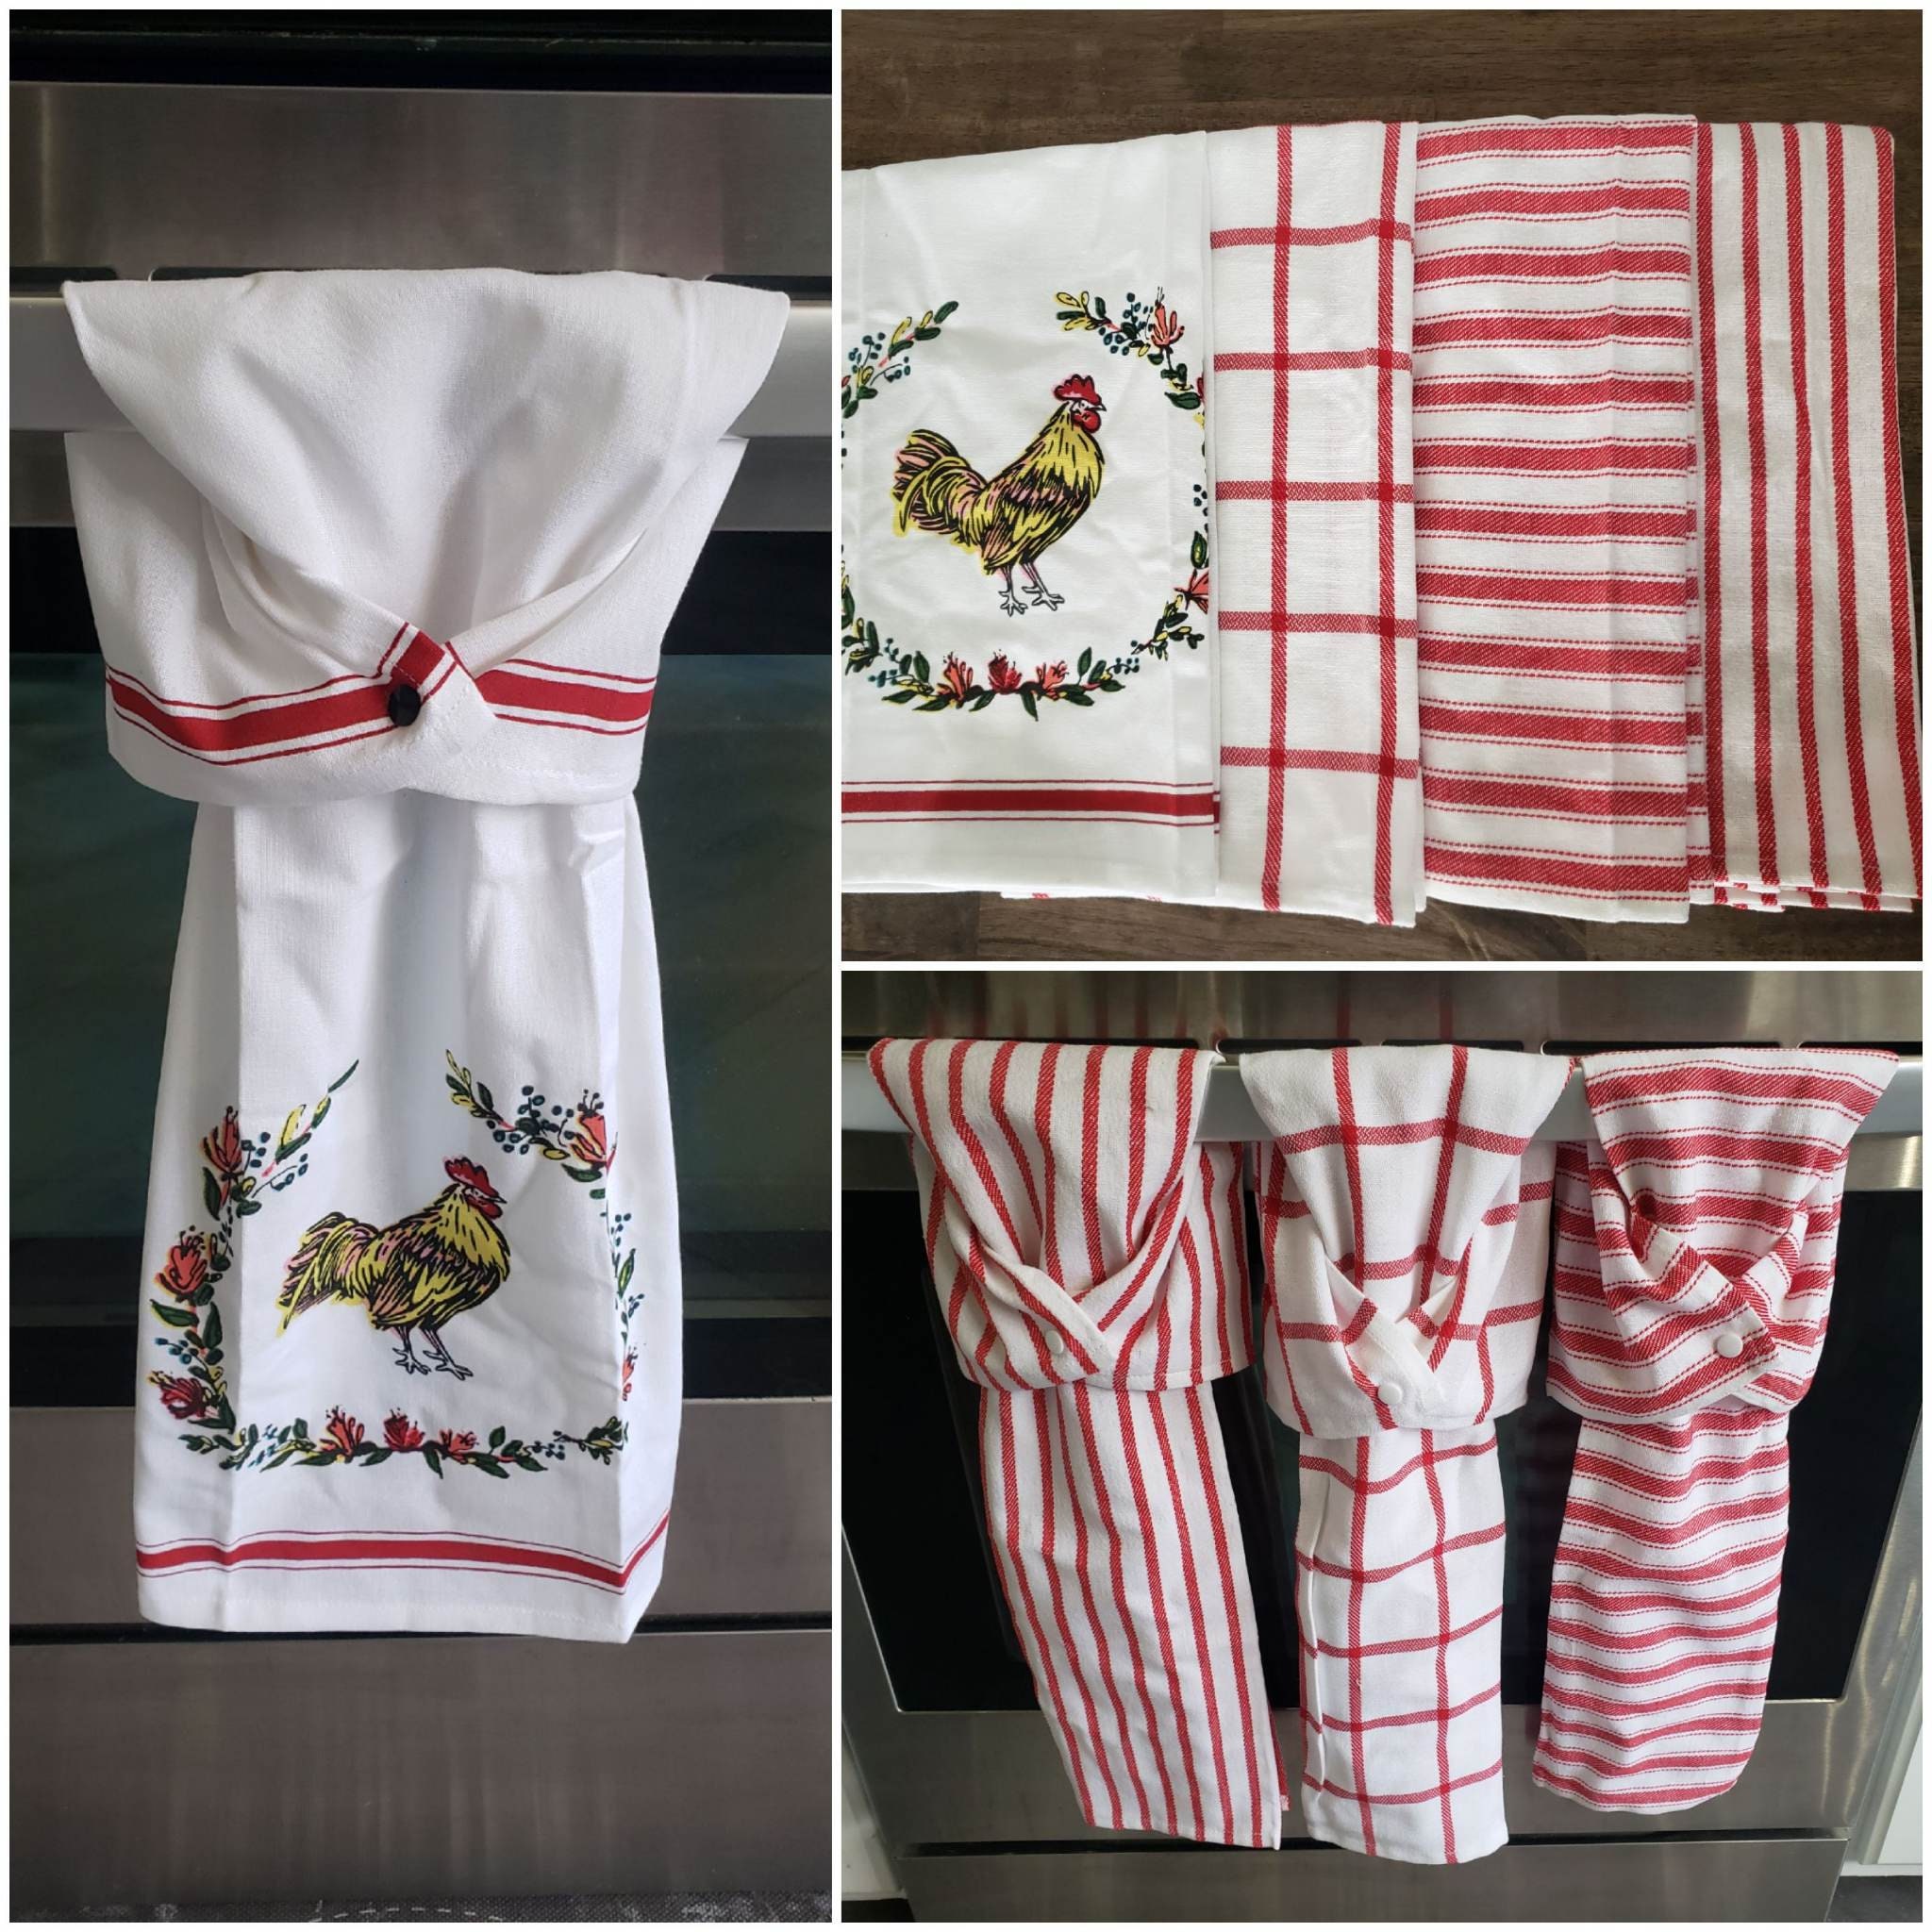 Hanging Towel, Cherry Kitchen Towel, Snap on Towel, Red Kitchen Towel, Snap  on Hand Towel, Oven Door Towel, Stay Put Towel 